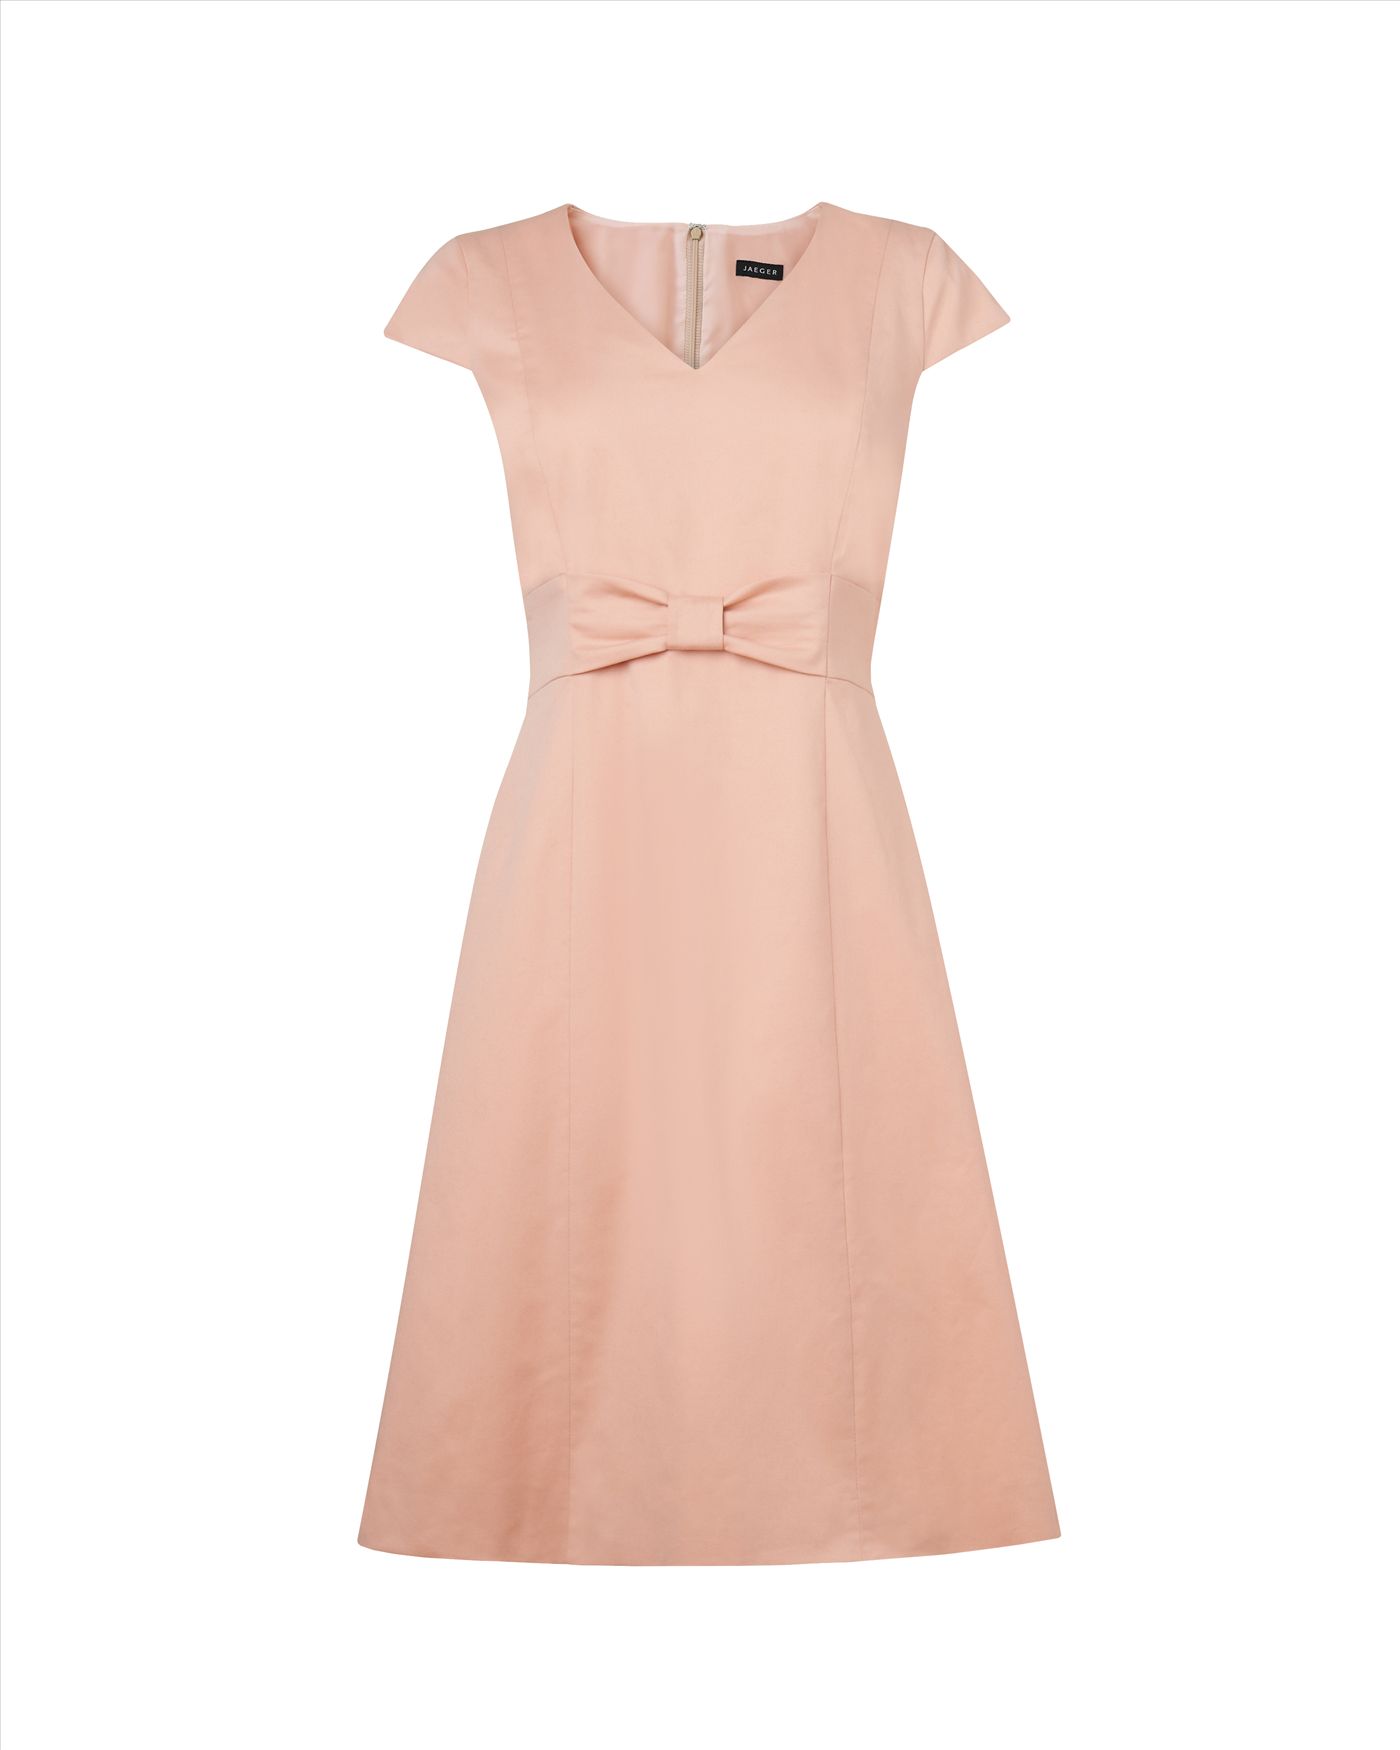 Lyst - Jaeger Bow Detail Dress in Natural